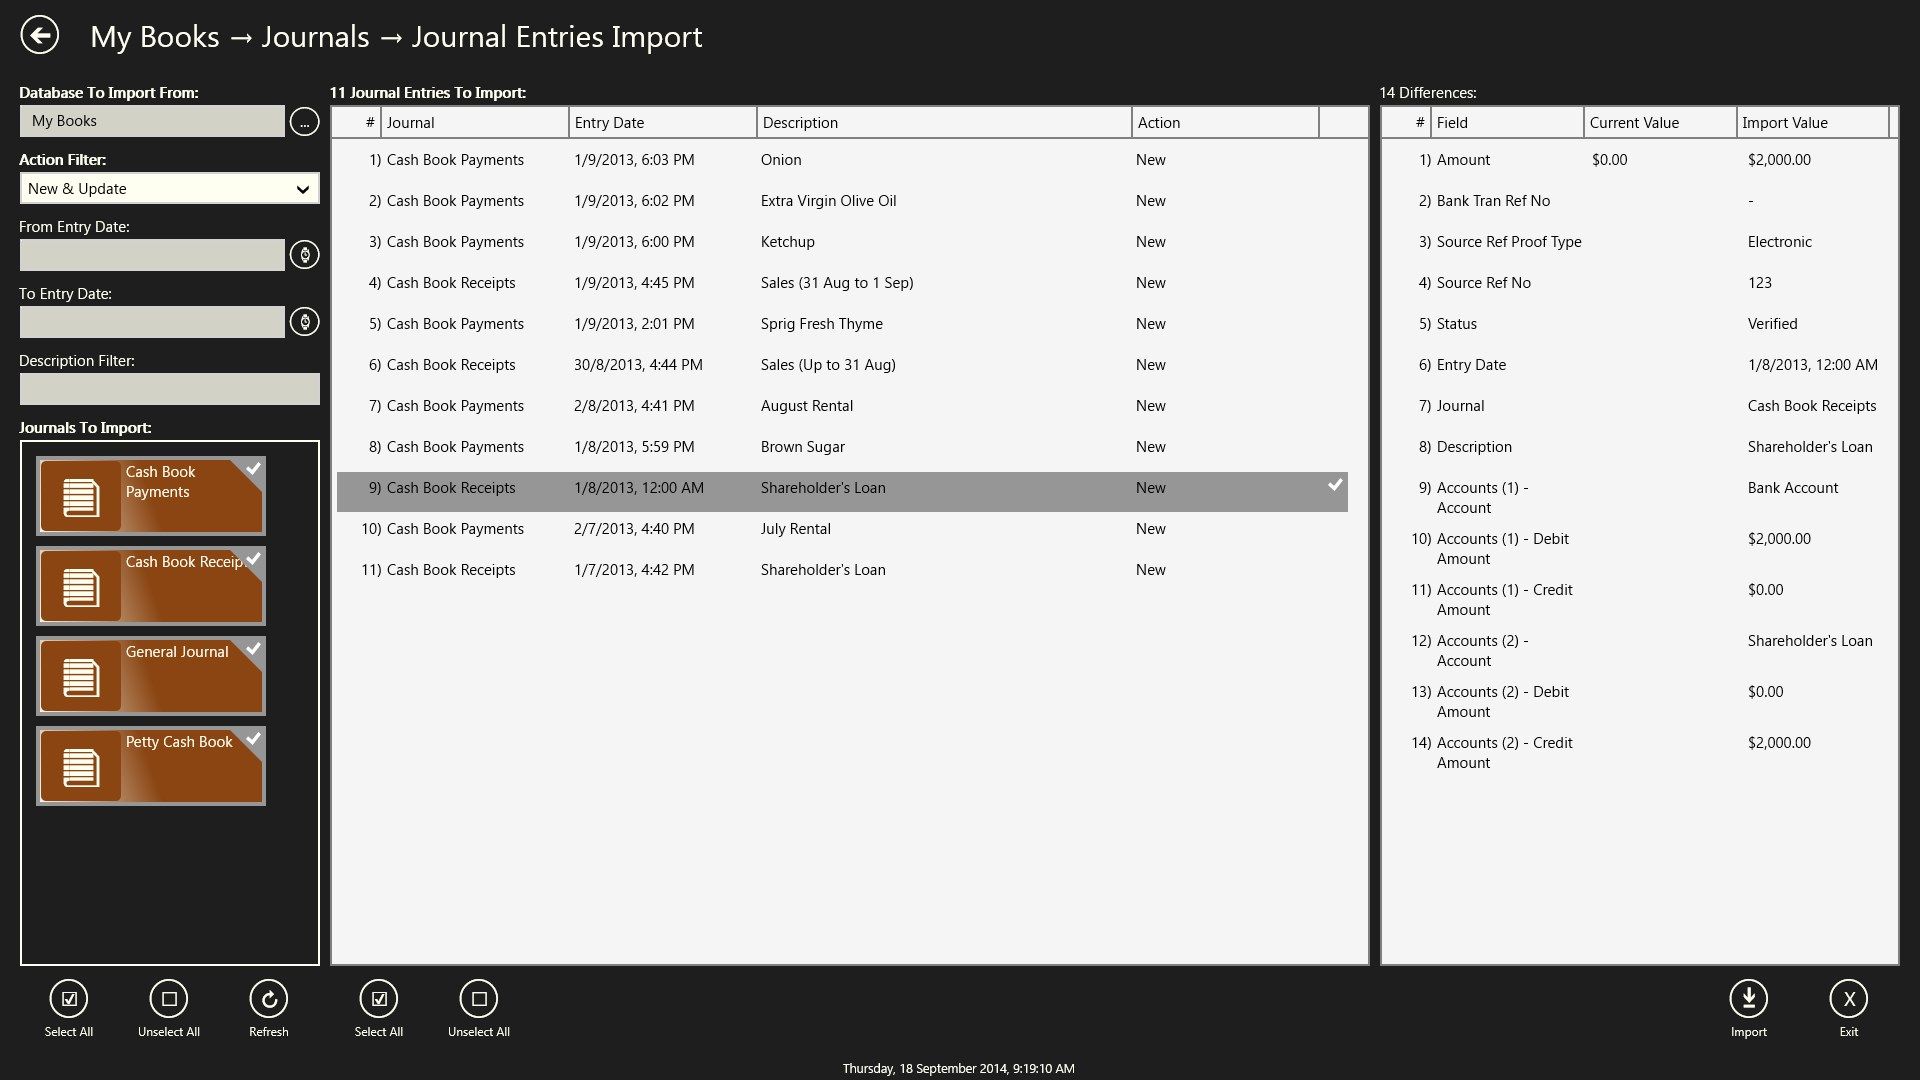 Journal Entries Import Page